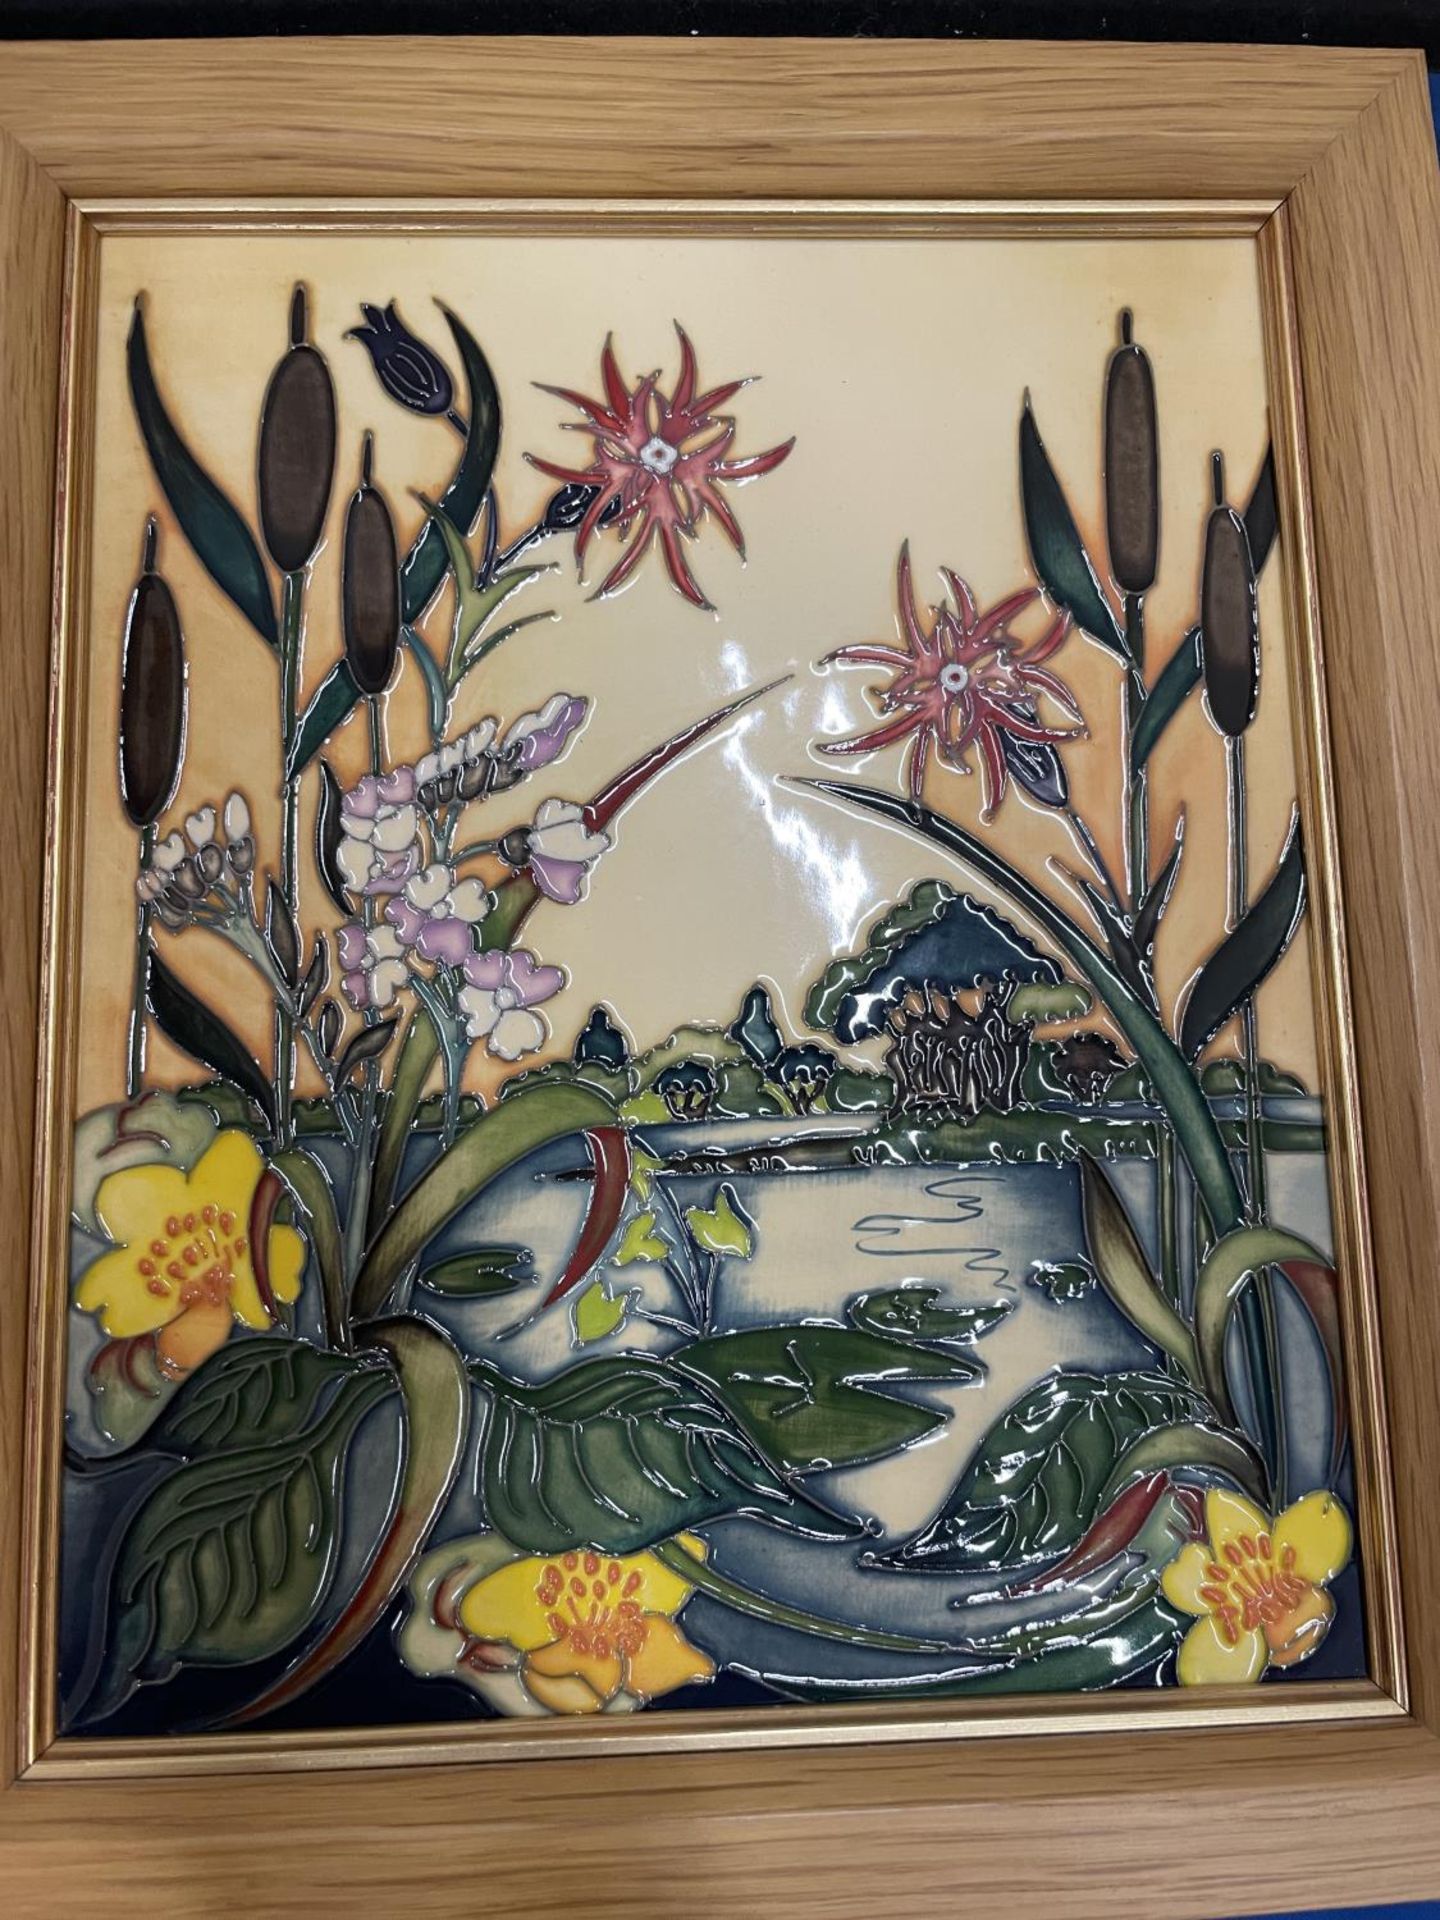 A MOORCROFT FRAMED PLAQUE RUNNYMEAD (NICOLA STANLEY) 2015 - Image 4 of 6